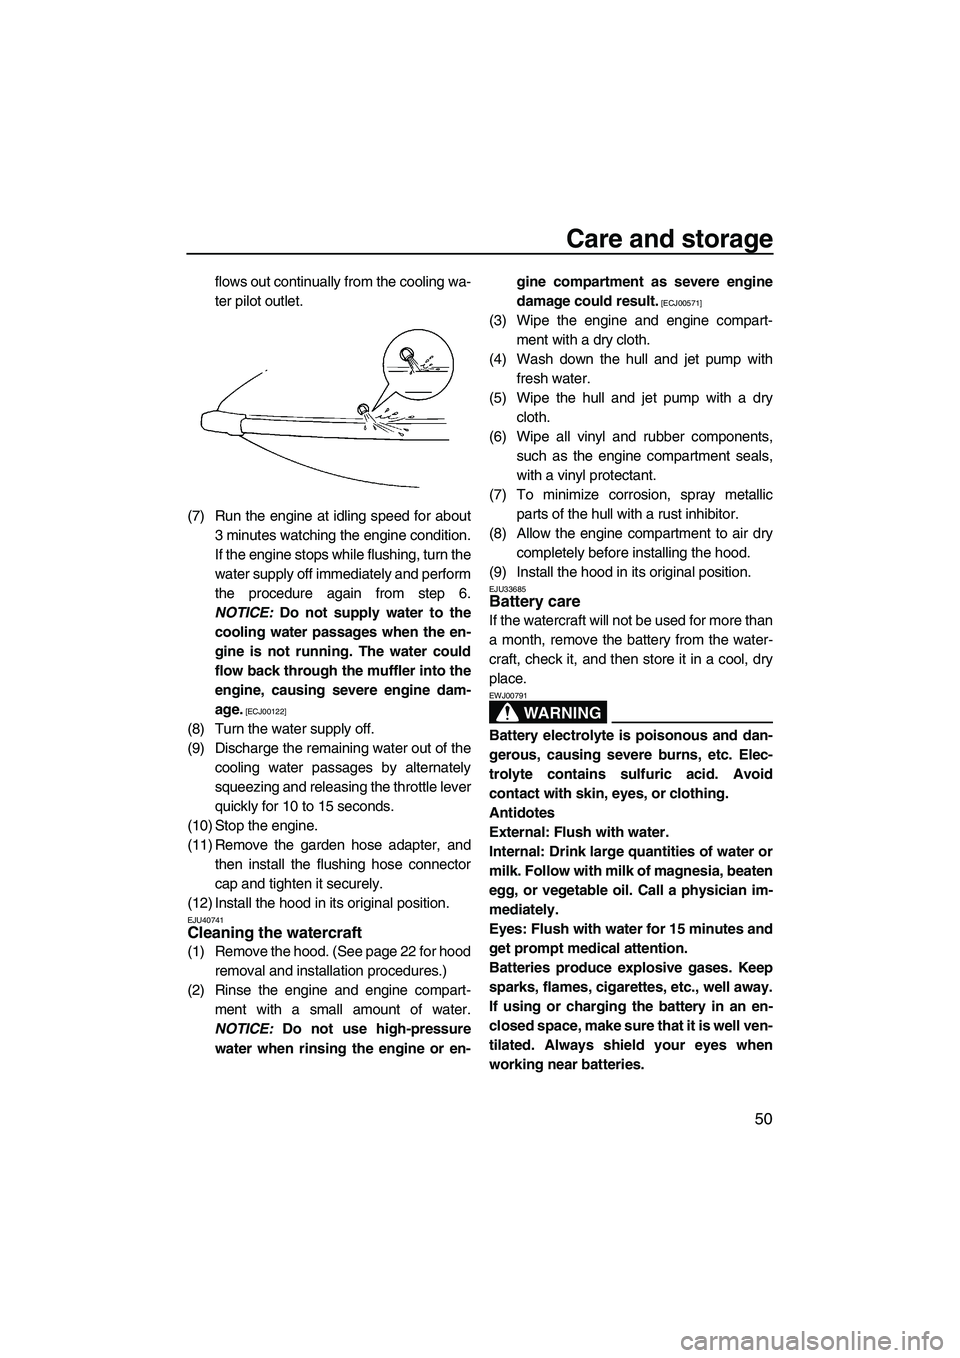 YAMAHA SUPERJET 2010  Owners Manual Care and storage
50
flows out continually from the cooling wa-
ter pilot outlet.
(7) Run the engine at idling speed for about
3 minutes watching the engine condition.
If the engine stops while flushin